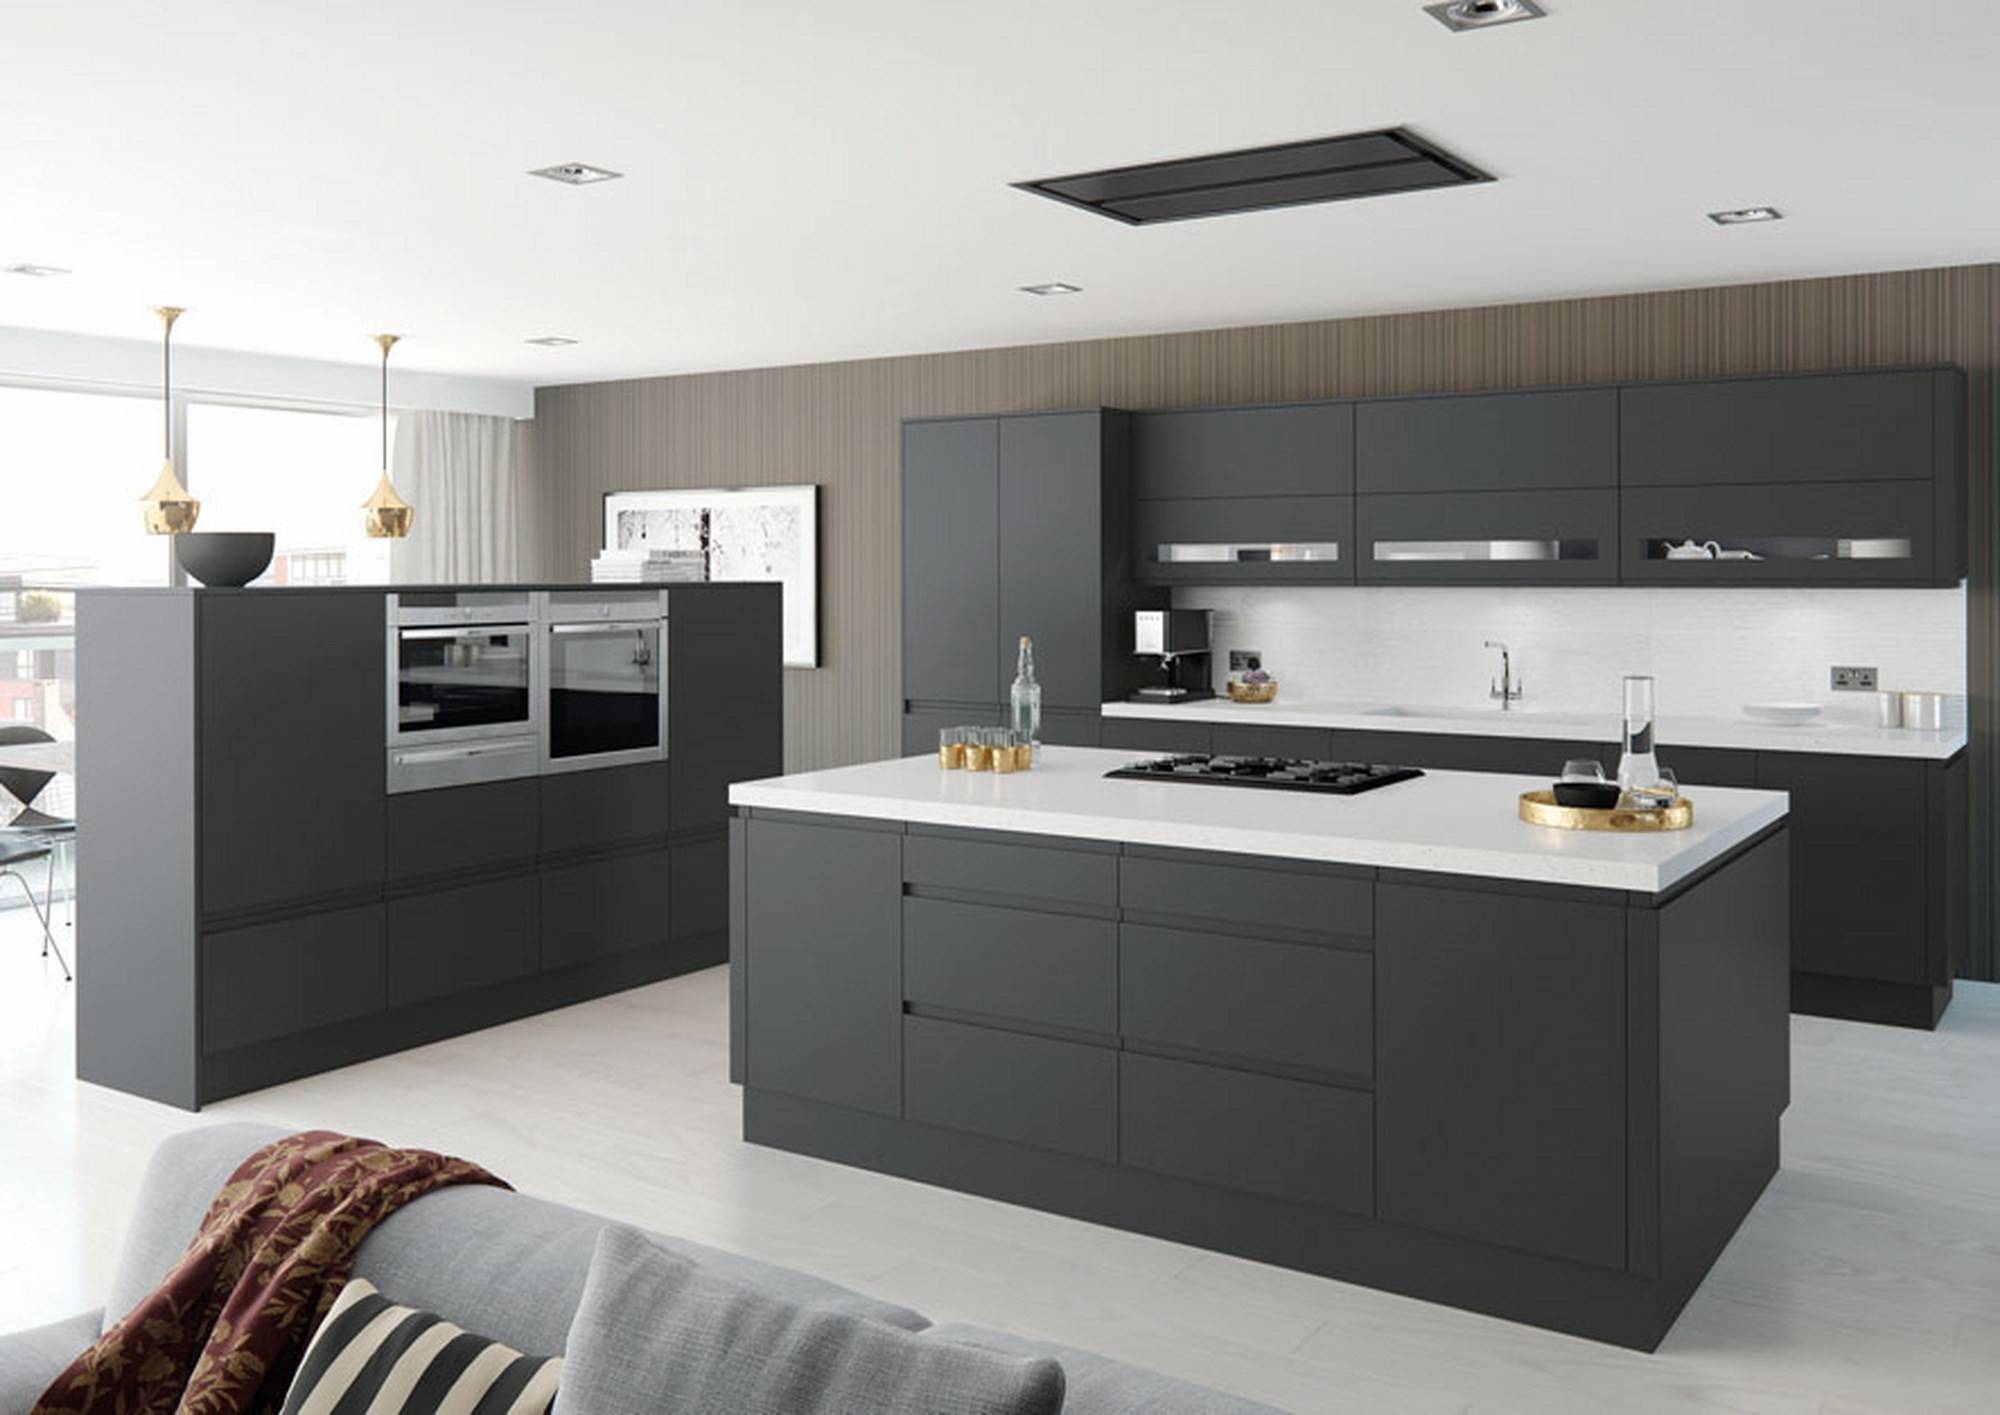 Anthracite cabinets for an ultra modern kitchen (from Harper Kitchens)